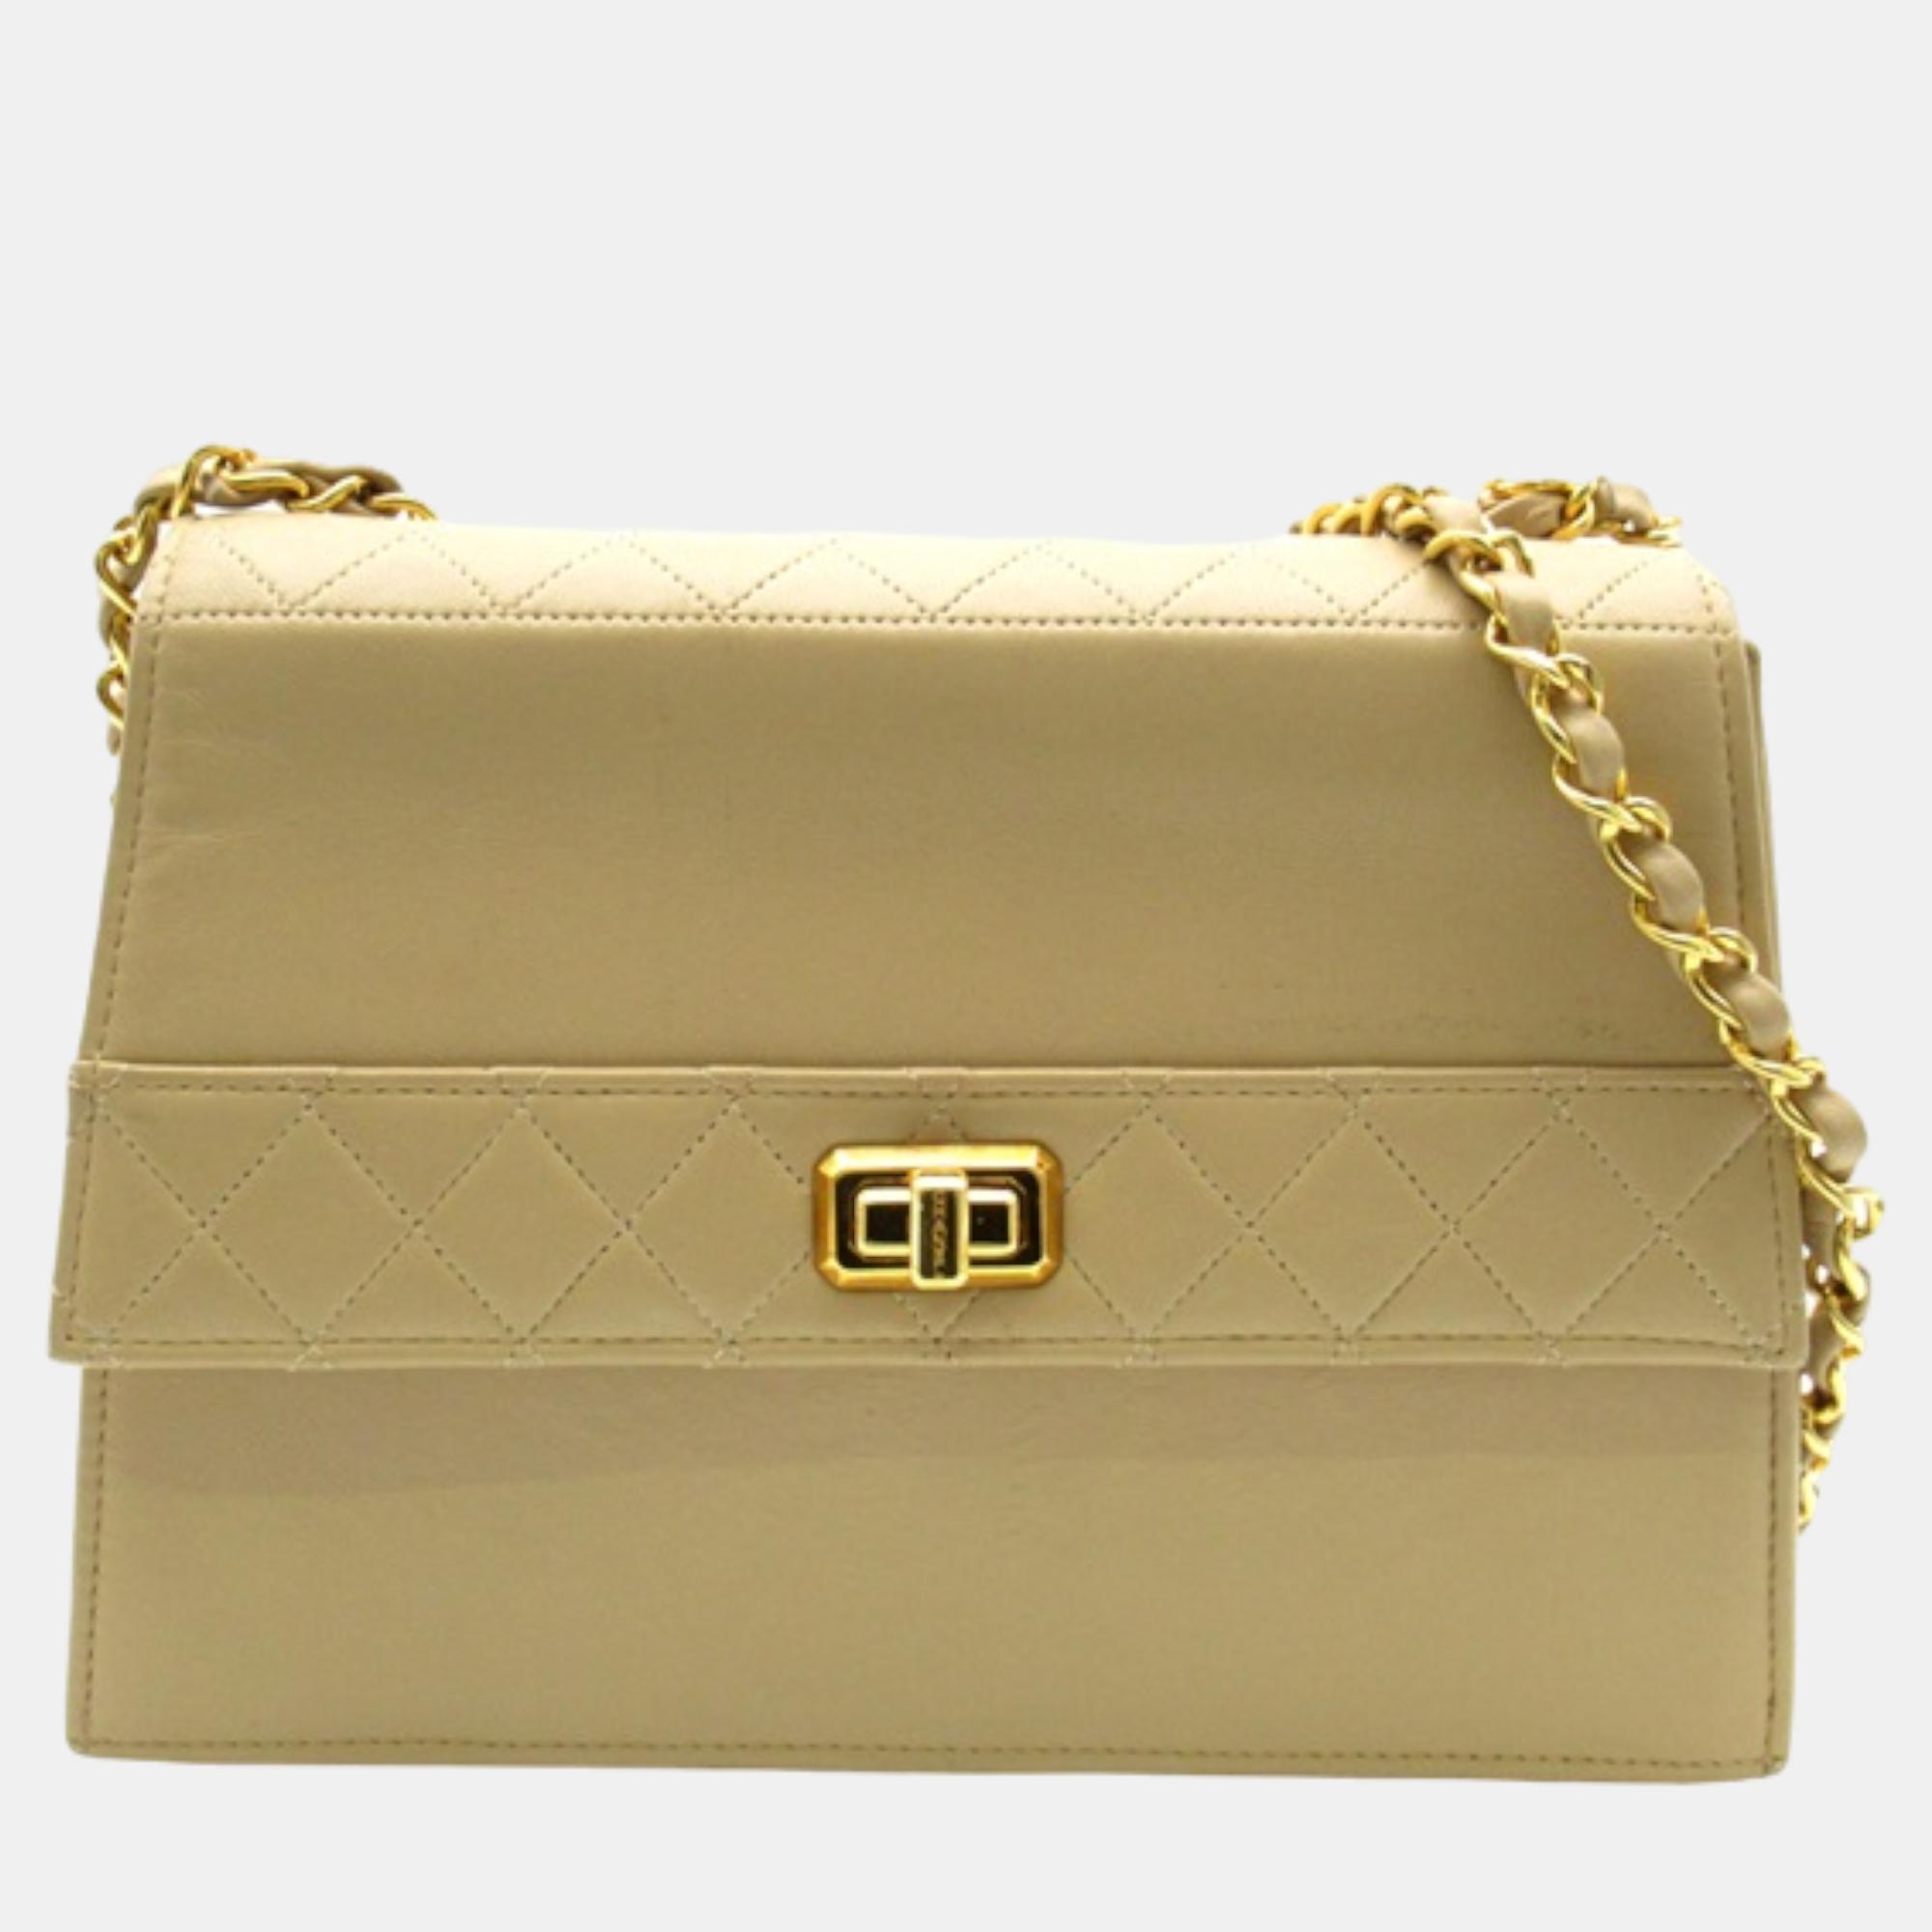 Chanel beige leather trapezoid flap bag